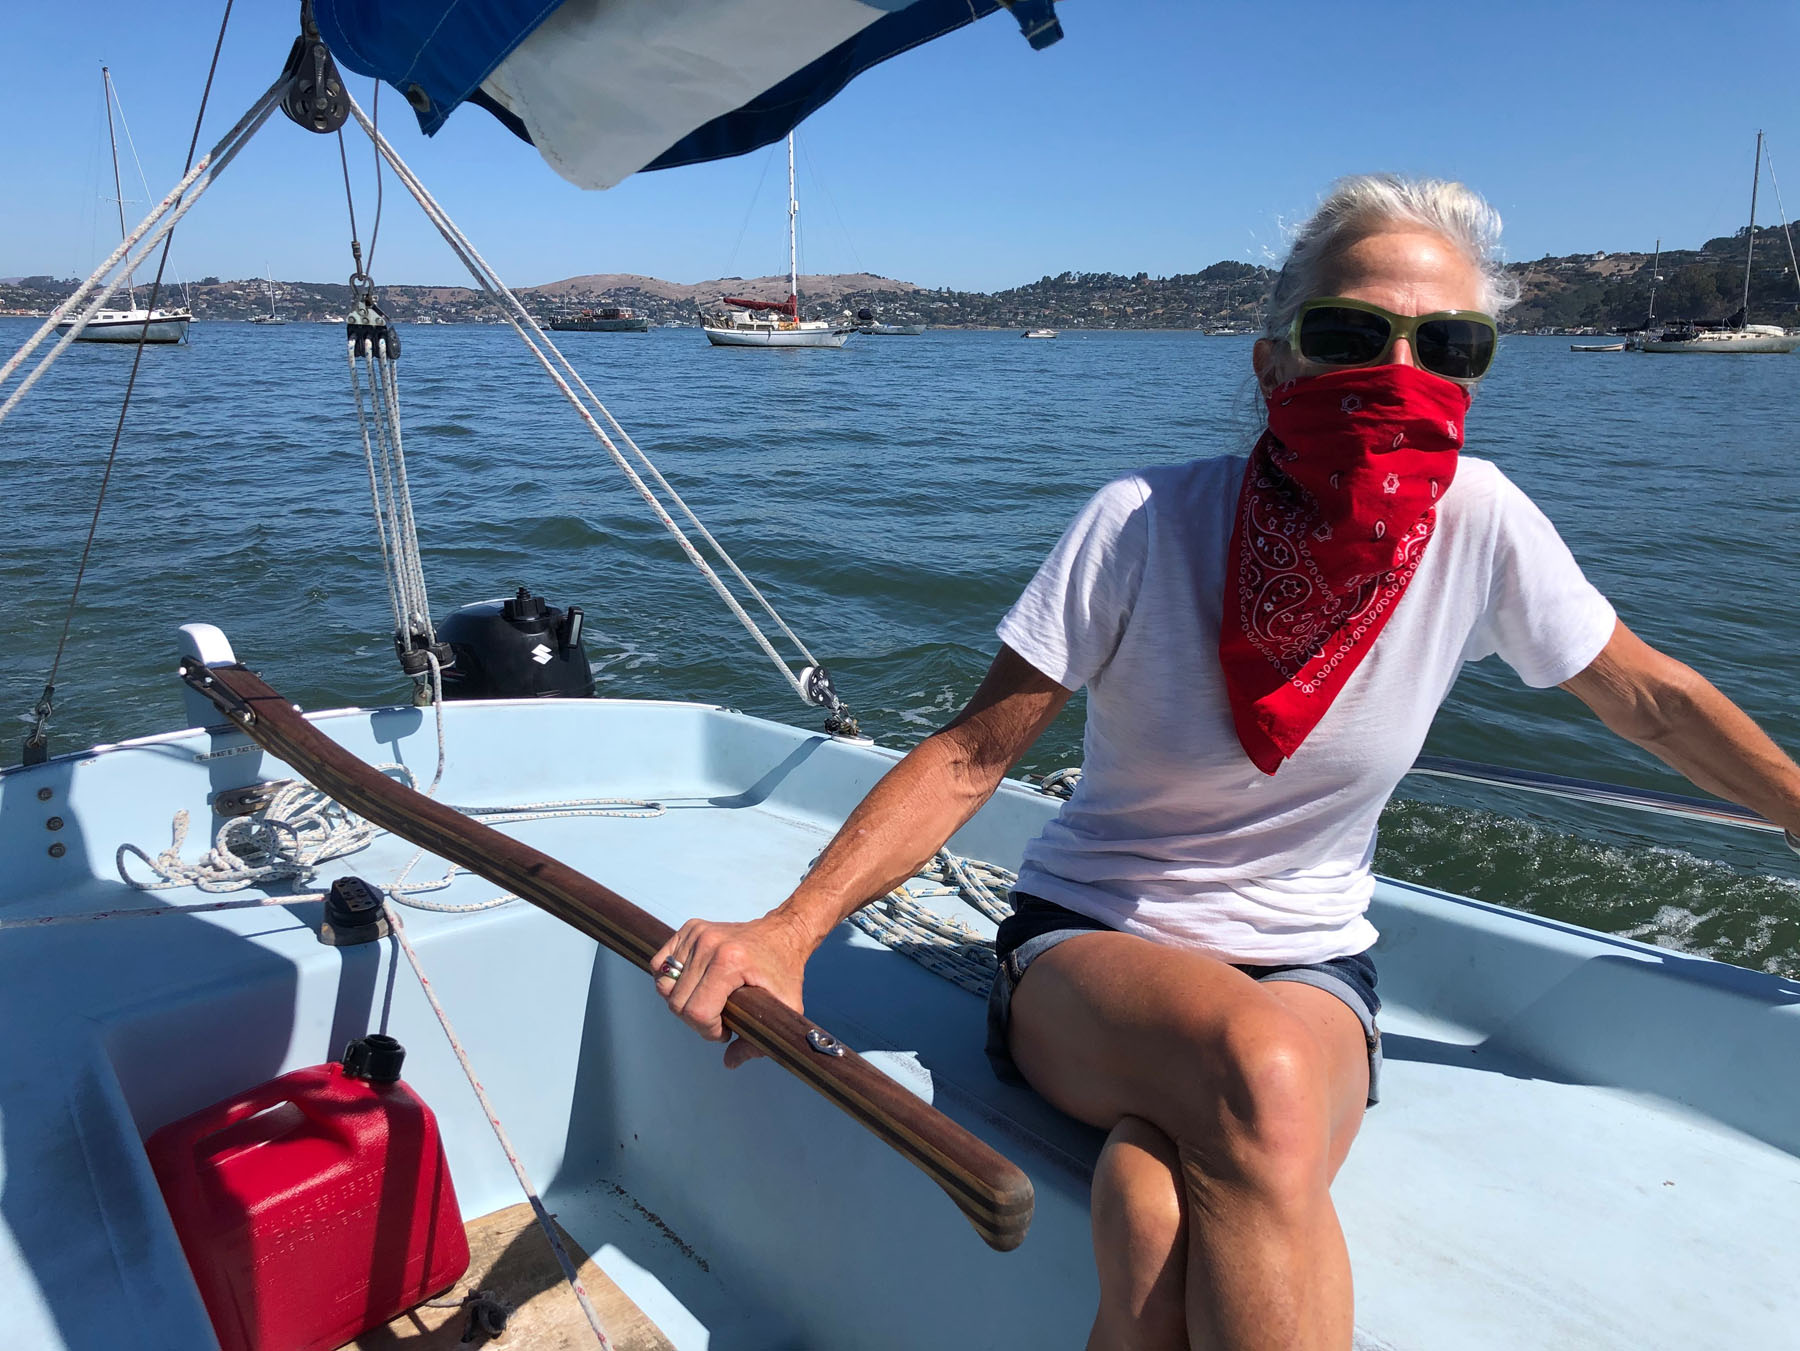 Michelle Slade on Cal 20 Jeanne